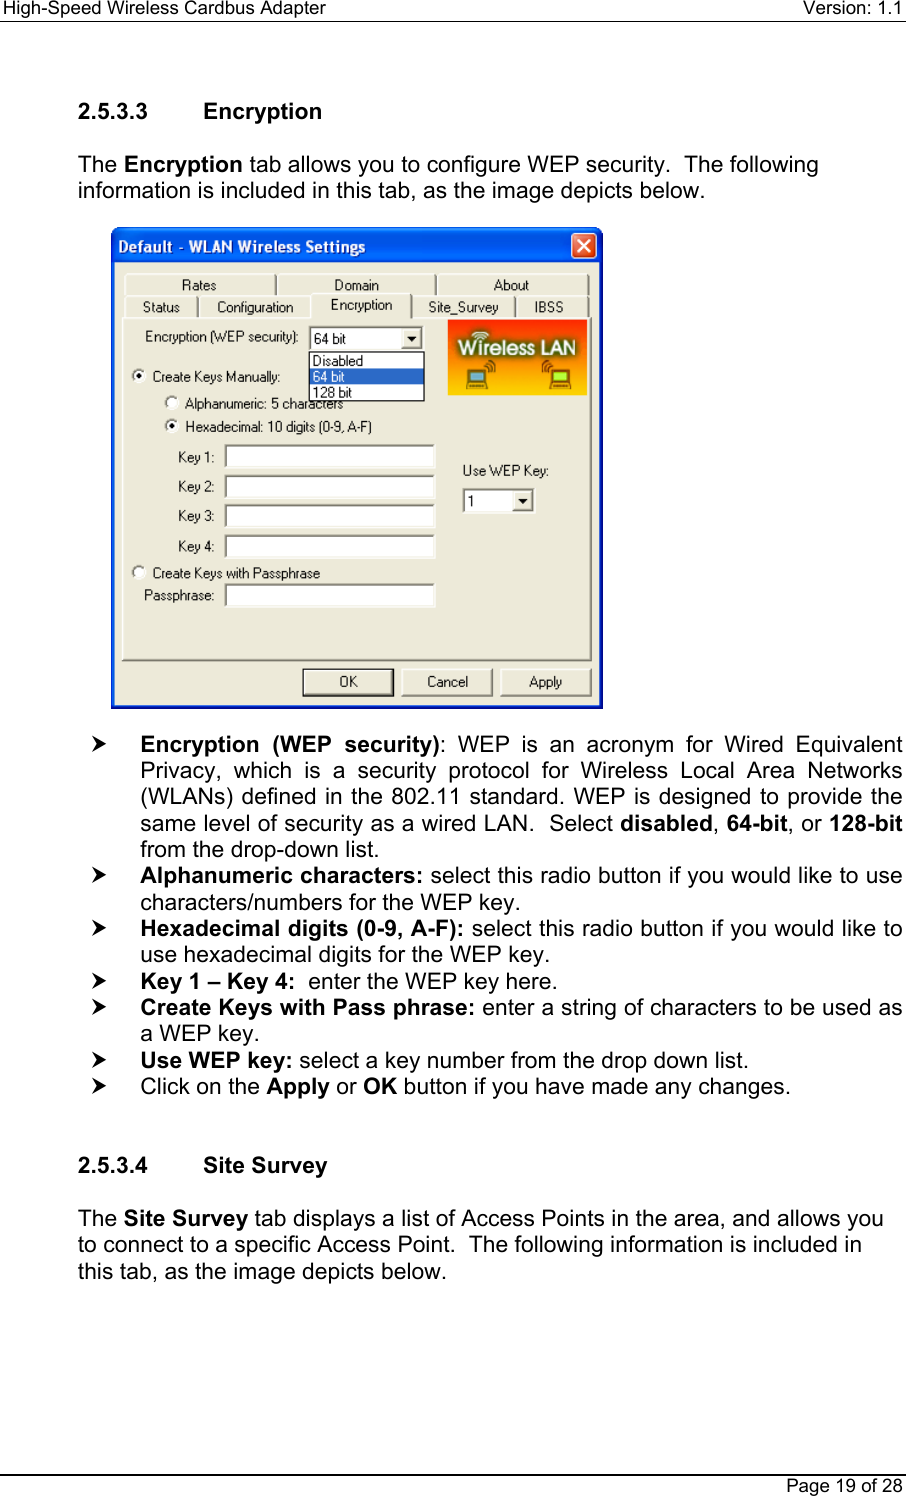 High-Speed Wireless Cardbus Adapter Version: 1.1Page 19 of 282.5.3.3    EncryptionThe Encryption tab allows you to configure WEP security.  The followinginformation is included in this tab, as the image depicts below.h Encryption (WEP security): WEP is an acronym for Wired EquivalentPrivacy, which is a security protocol for Wireless Local Area Networks(WLANs) defined in the 802.11 standard. WEP is designed to provide thesame level of security as a wired LAN.  Select disabled, 64-bit, or 128-bitfrom the drop-down list.h Alphanumeric characters: select this radio button if you would like to usecharacters/numbers for the WEP key.h Hexadecimal digits (0-9, A-F): select this radio button if you would like touse hexadecimal digits for the WEP key.h Key 1 – Key 4:  enter the WEP key here.h Create Keys with Pass phrase: enter a string of characters to be used asa WEP key.h Use WEP key: select a key number from the drop down list.h  Click on the Apply or OK button if you have made any changes.2.5.3.4    Site SurveyThe Site Survey tab displays a list of Access Points in the area, and allows youto connect to a specific Access Point.  The following information is included inthis tab, as the image depicts below.